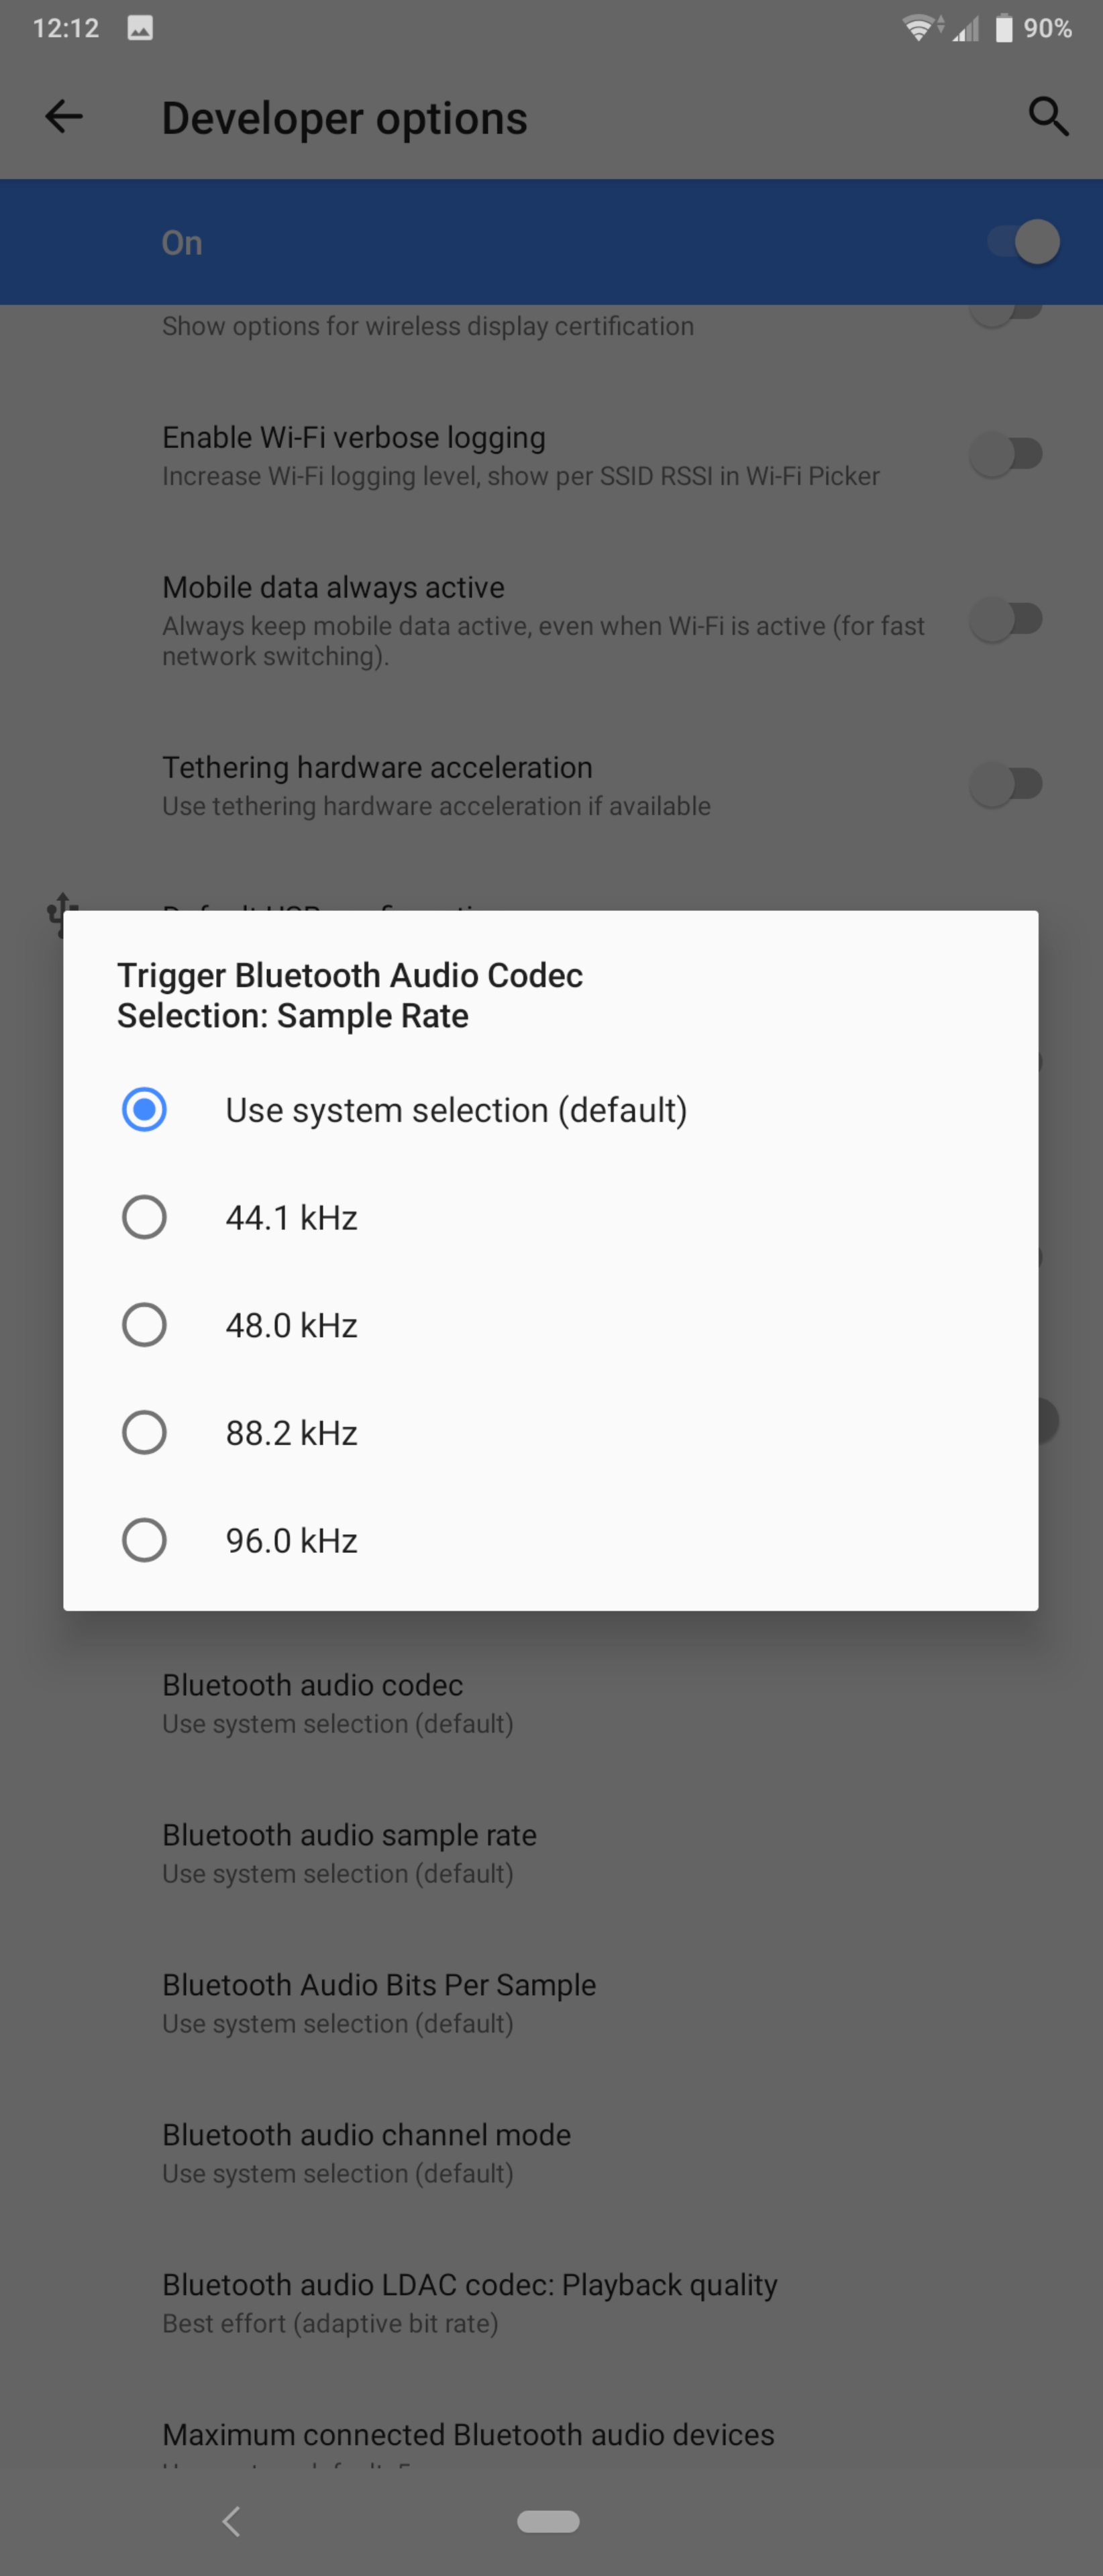 aptx HD support for Galaxy Note 9 - Page 10 - Samsung Community